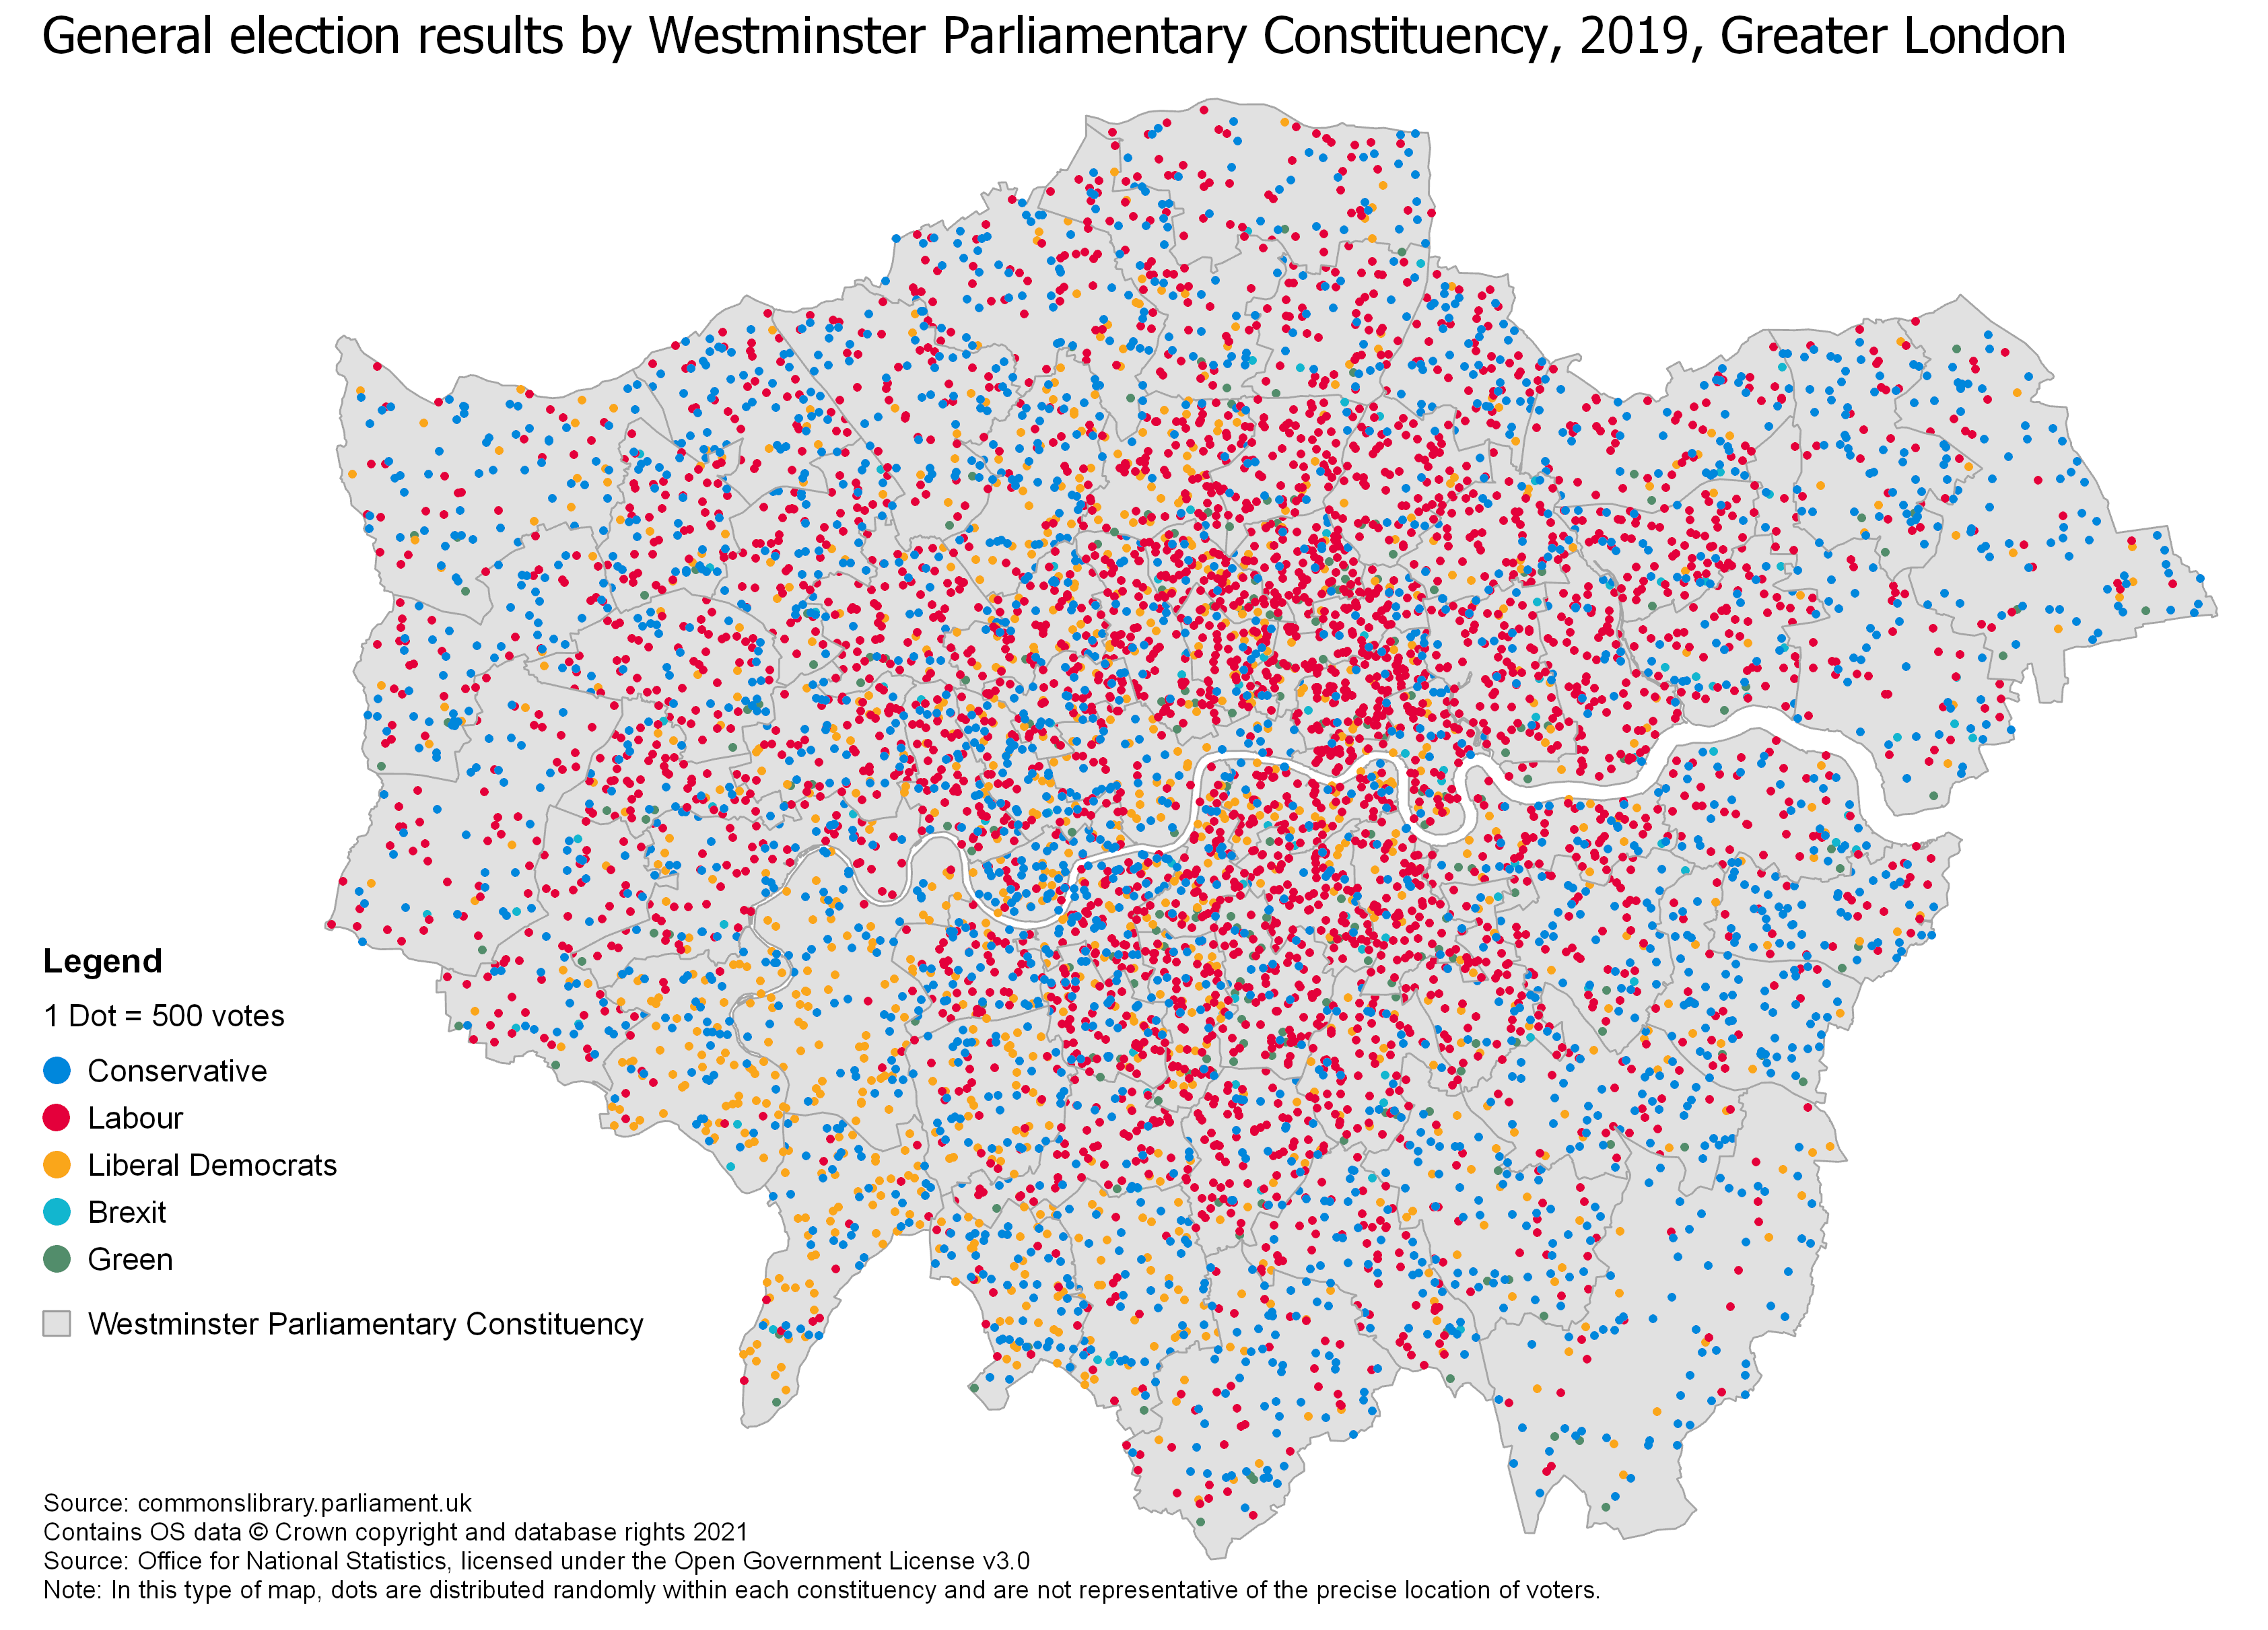 Dot density map of the results of the 2019 UK General Election